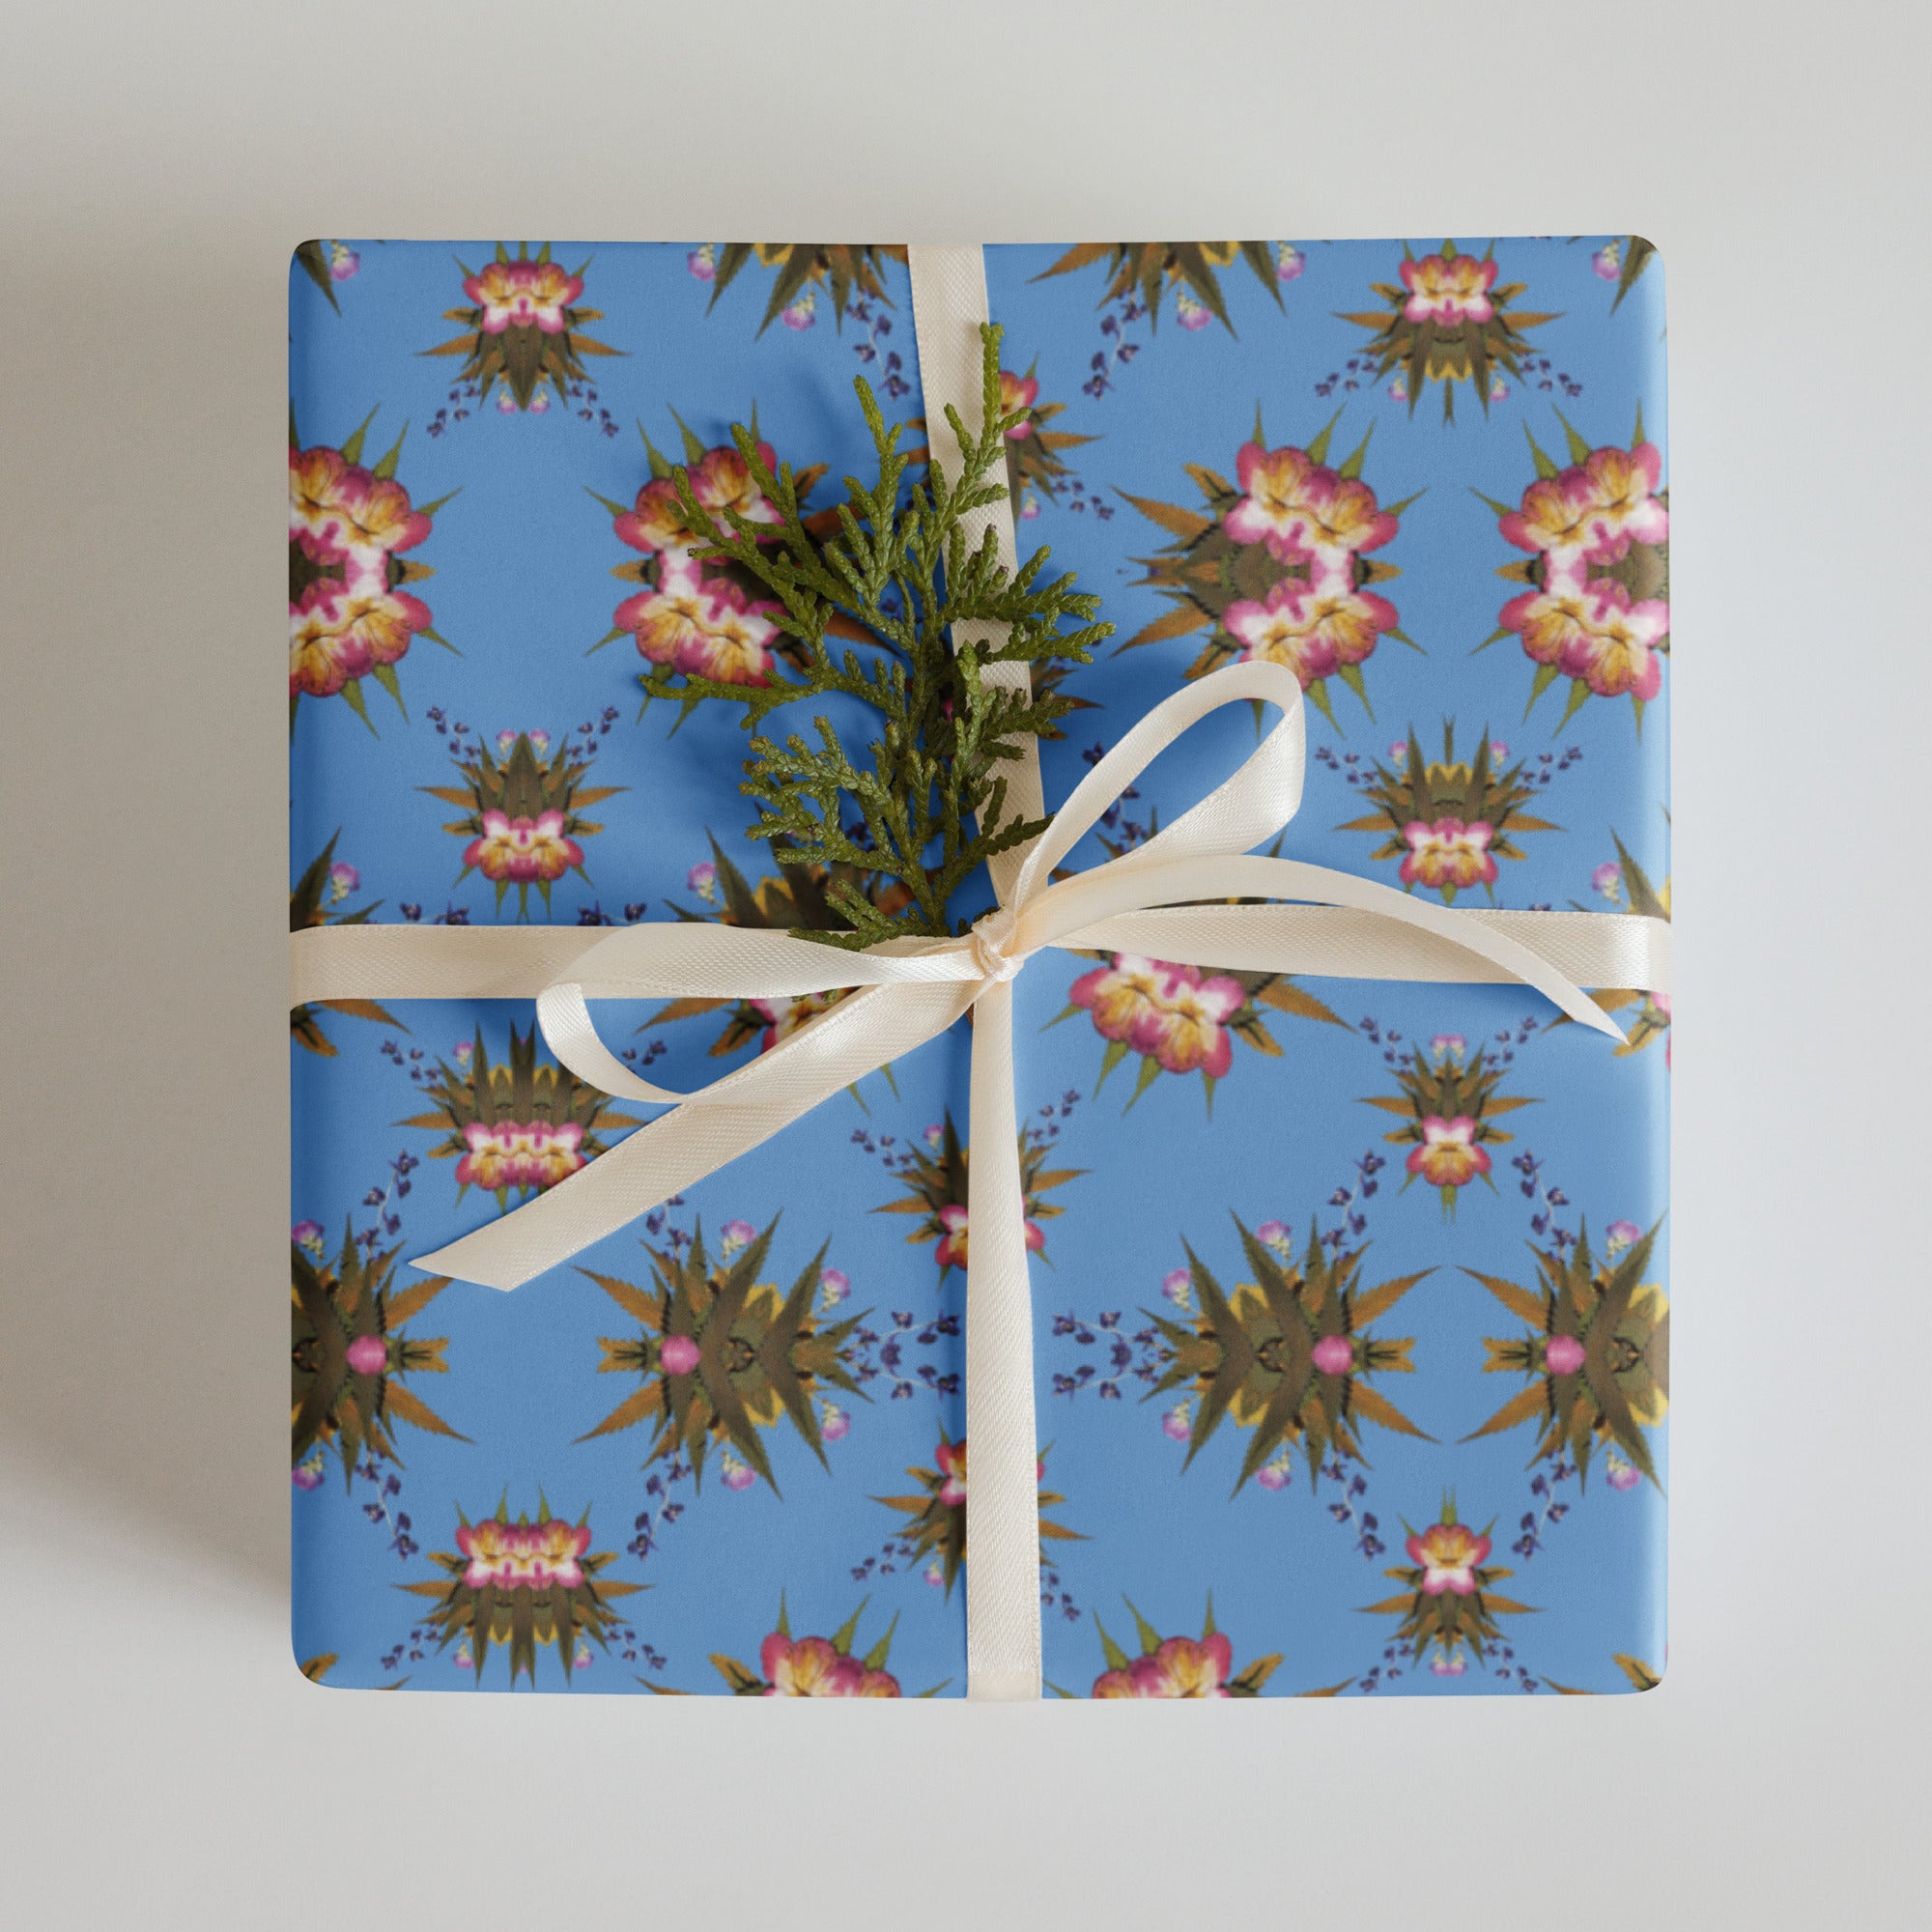 Smoochie Boochie (Sky) Wrapping paper sheets